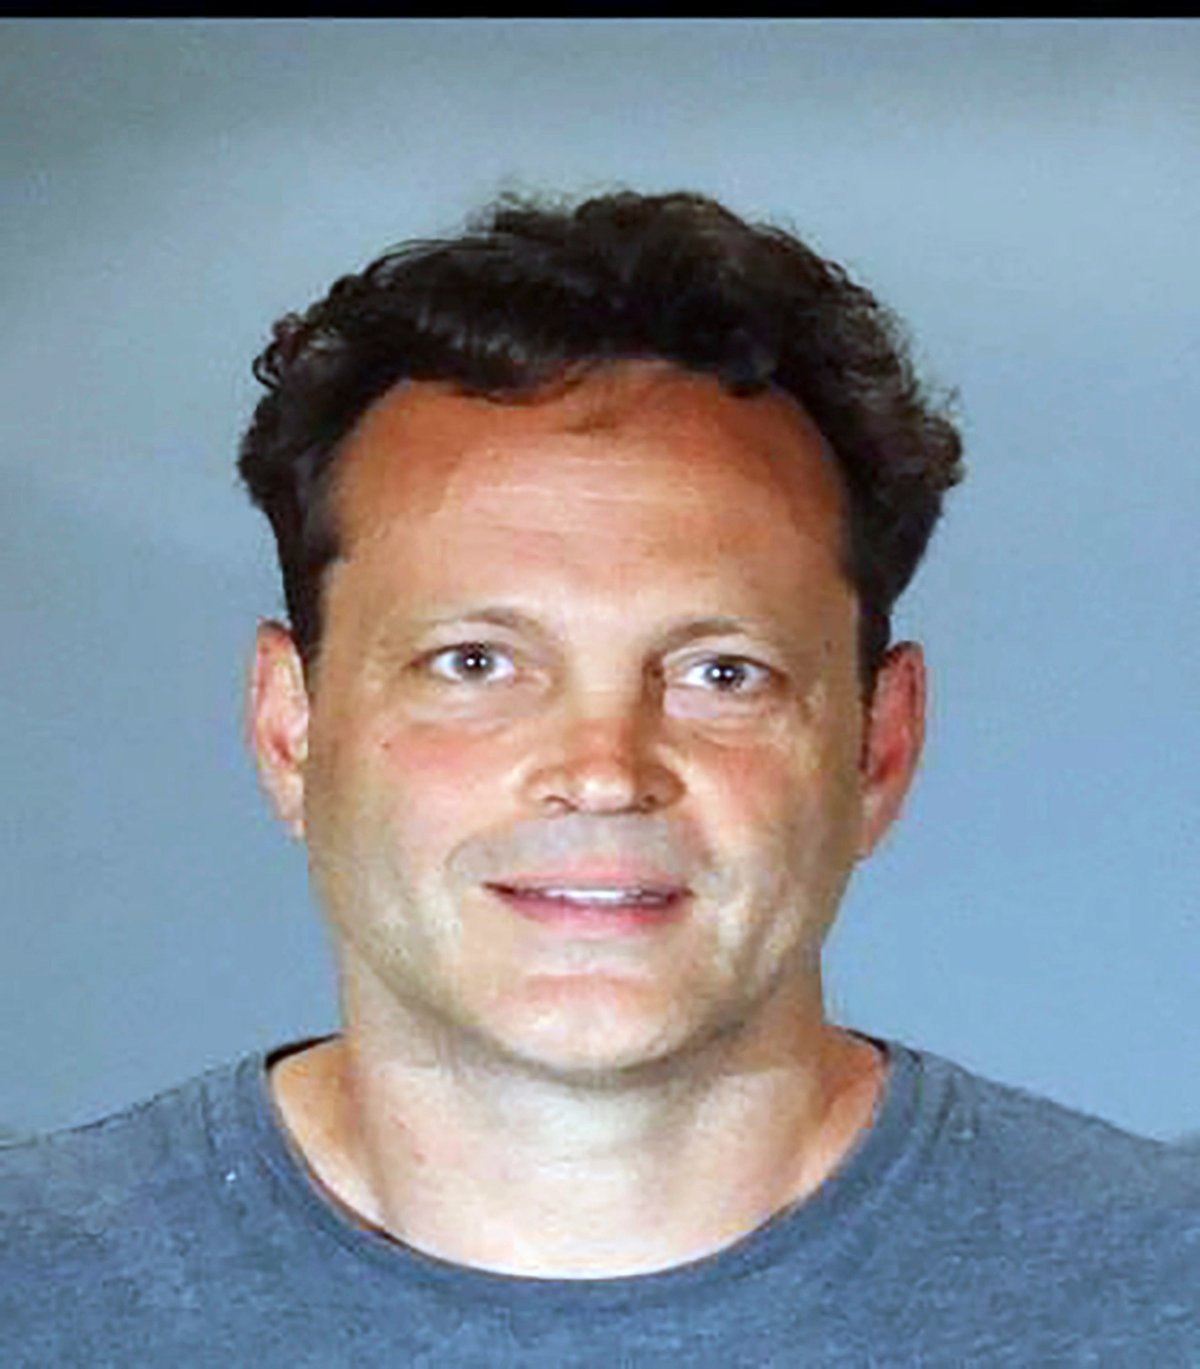 Vince Vaughn, seen here in his booking photo with the Manhattan Beach Police Department, was arrested Sunday on suspicion of DUI.